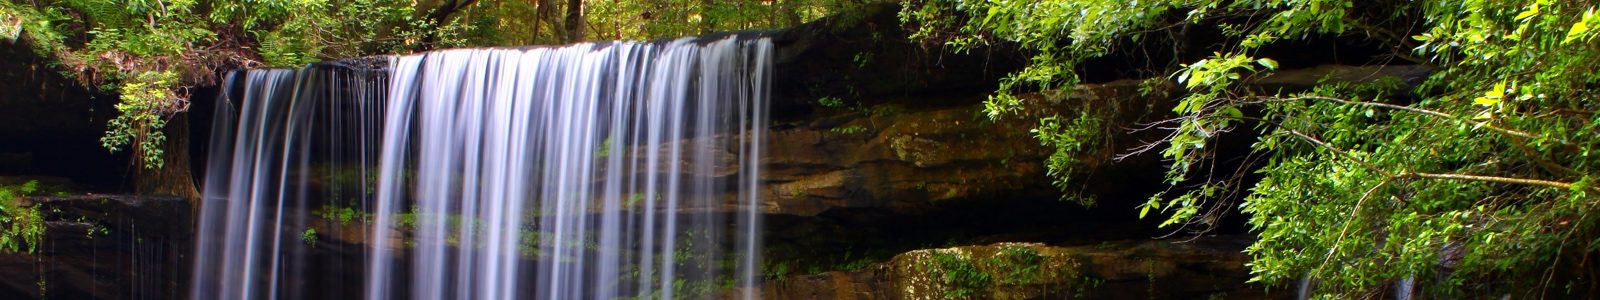 Banner showing a serene waterfall